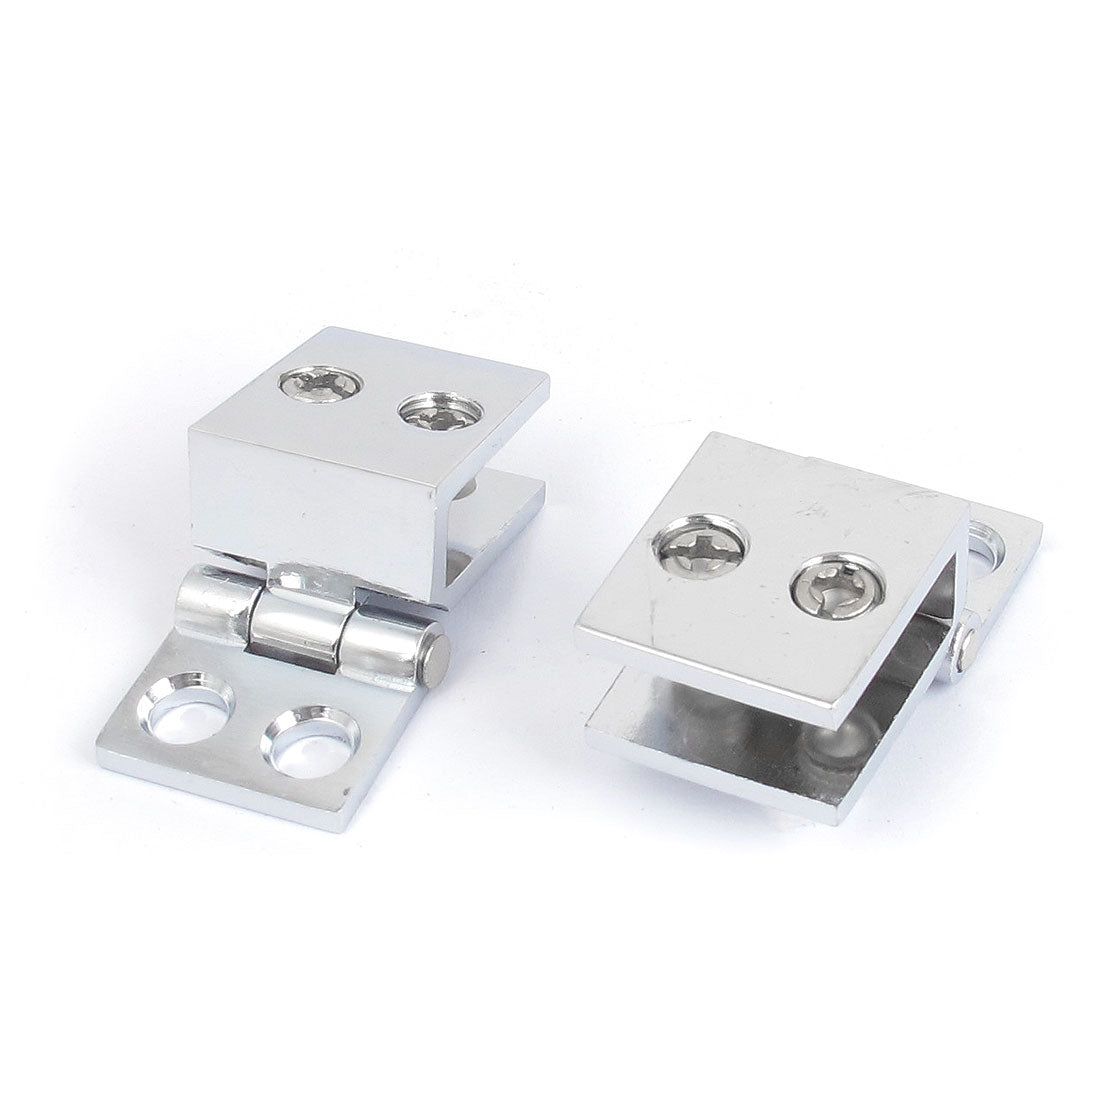 uxcell Uxcell 5mm-8mm Adjustable 90 Degree Metal Glass Door Clip Clamp Hinge 2pcs